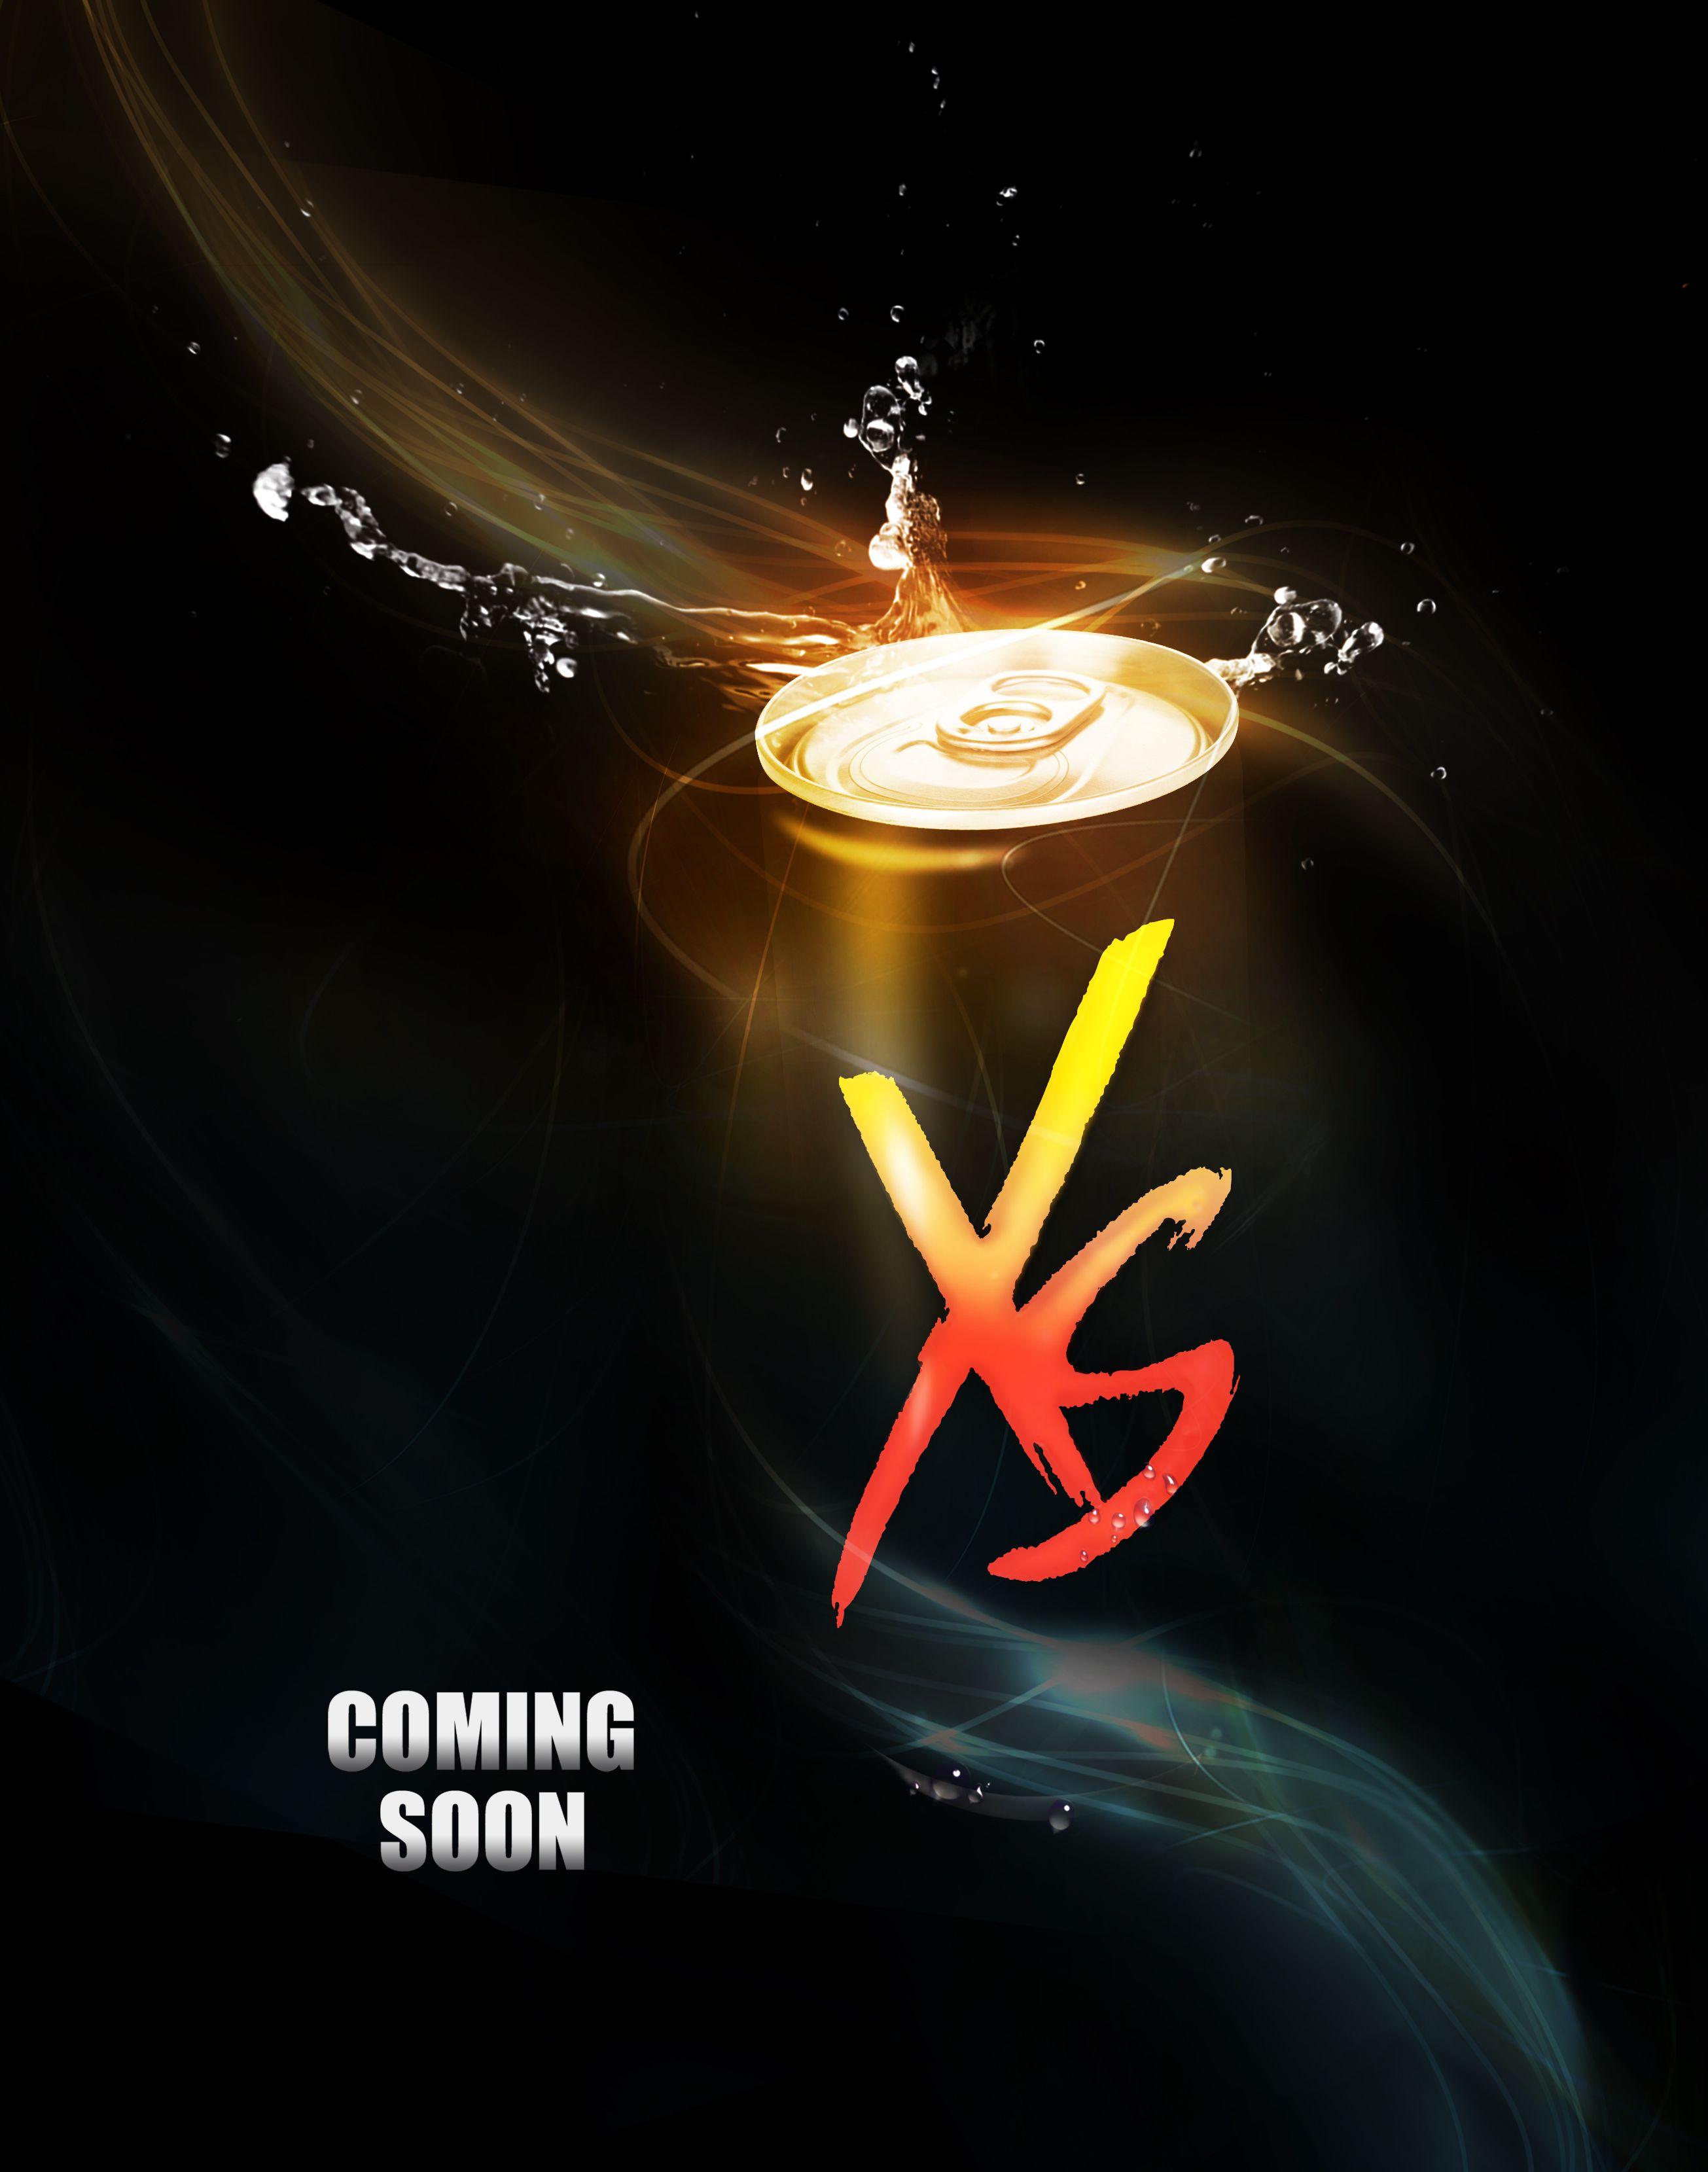 XS Energy Logo - XS Energy Drink Teaser AD Design by gtl communication | Ryan's Amway ...